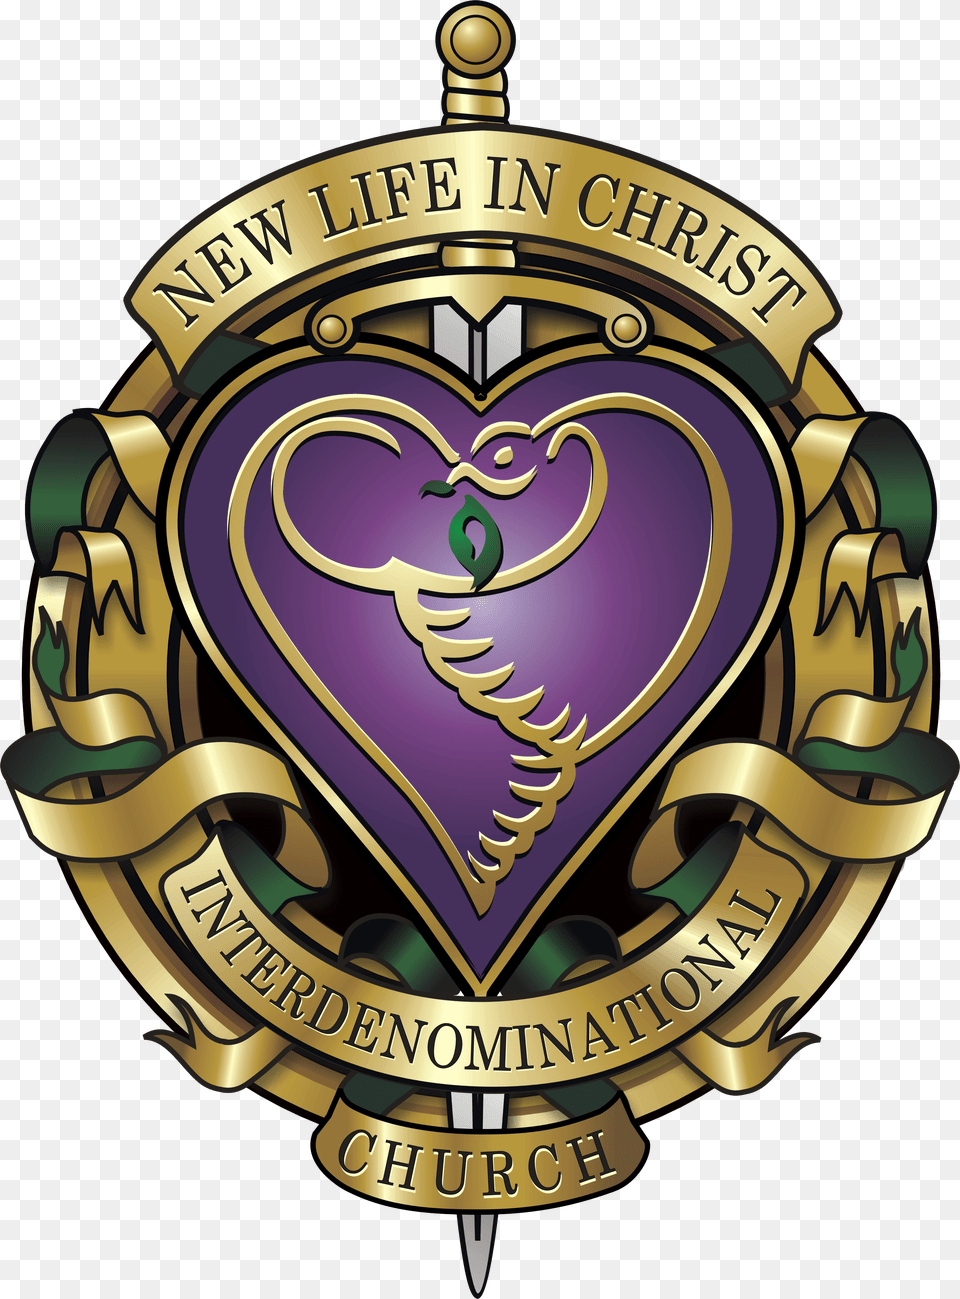 New Life In Christ Crest New Life In Christ Interdenominational Church Free Png